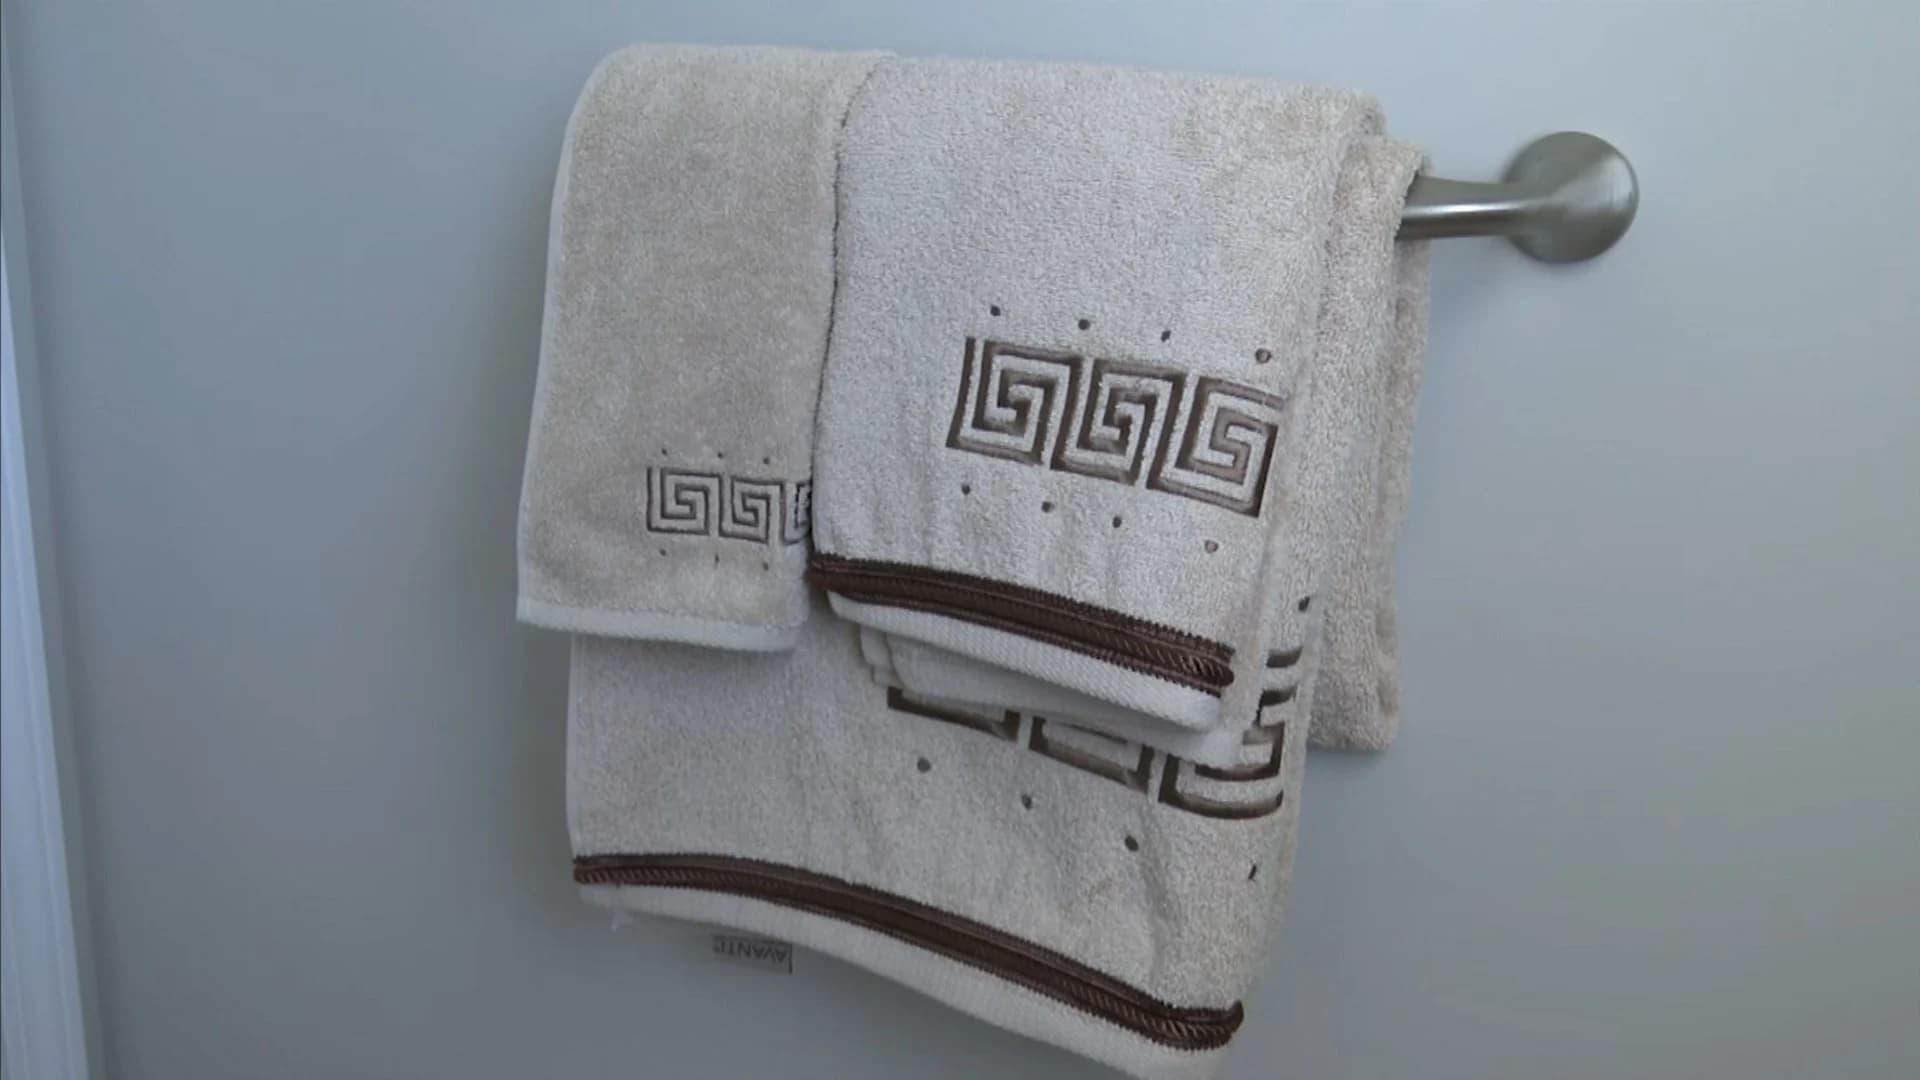 How many is too many? Debate about towels blows up the internet